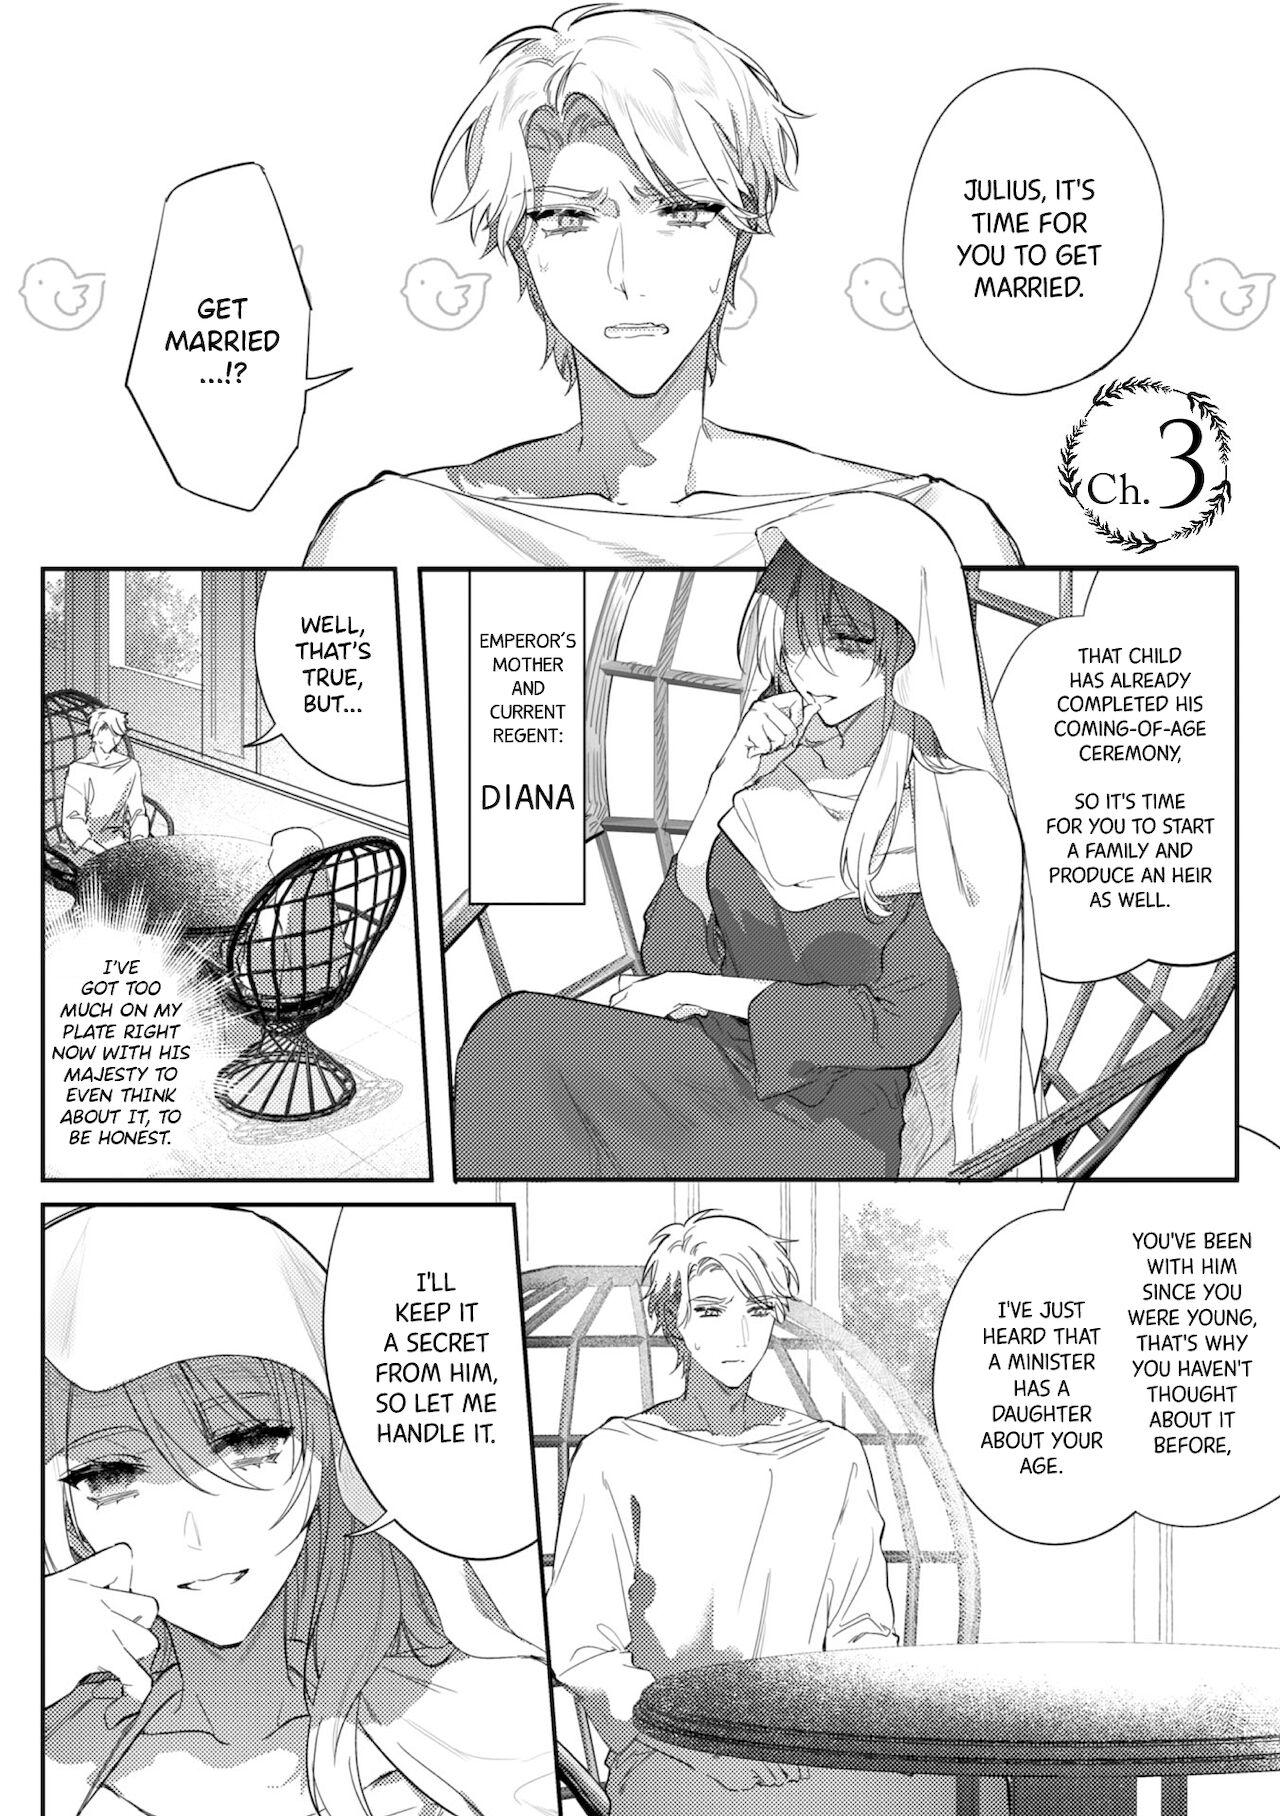 Rubdown [Hagiyoshi] Intou Kyuuteishi ~Intei to Yobareta Bishounen~ Ch. 3 | Records of the Lascivious Court ~The Beautiful Boy Who Was Called the “Licentious Emperor”~ Ch. 3 [English] [Black Grimoires] Anal Fuck - Page 2